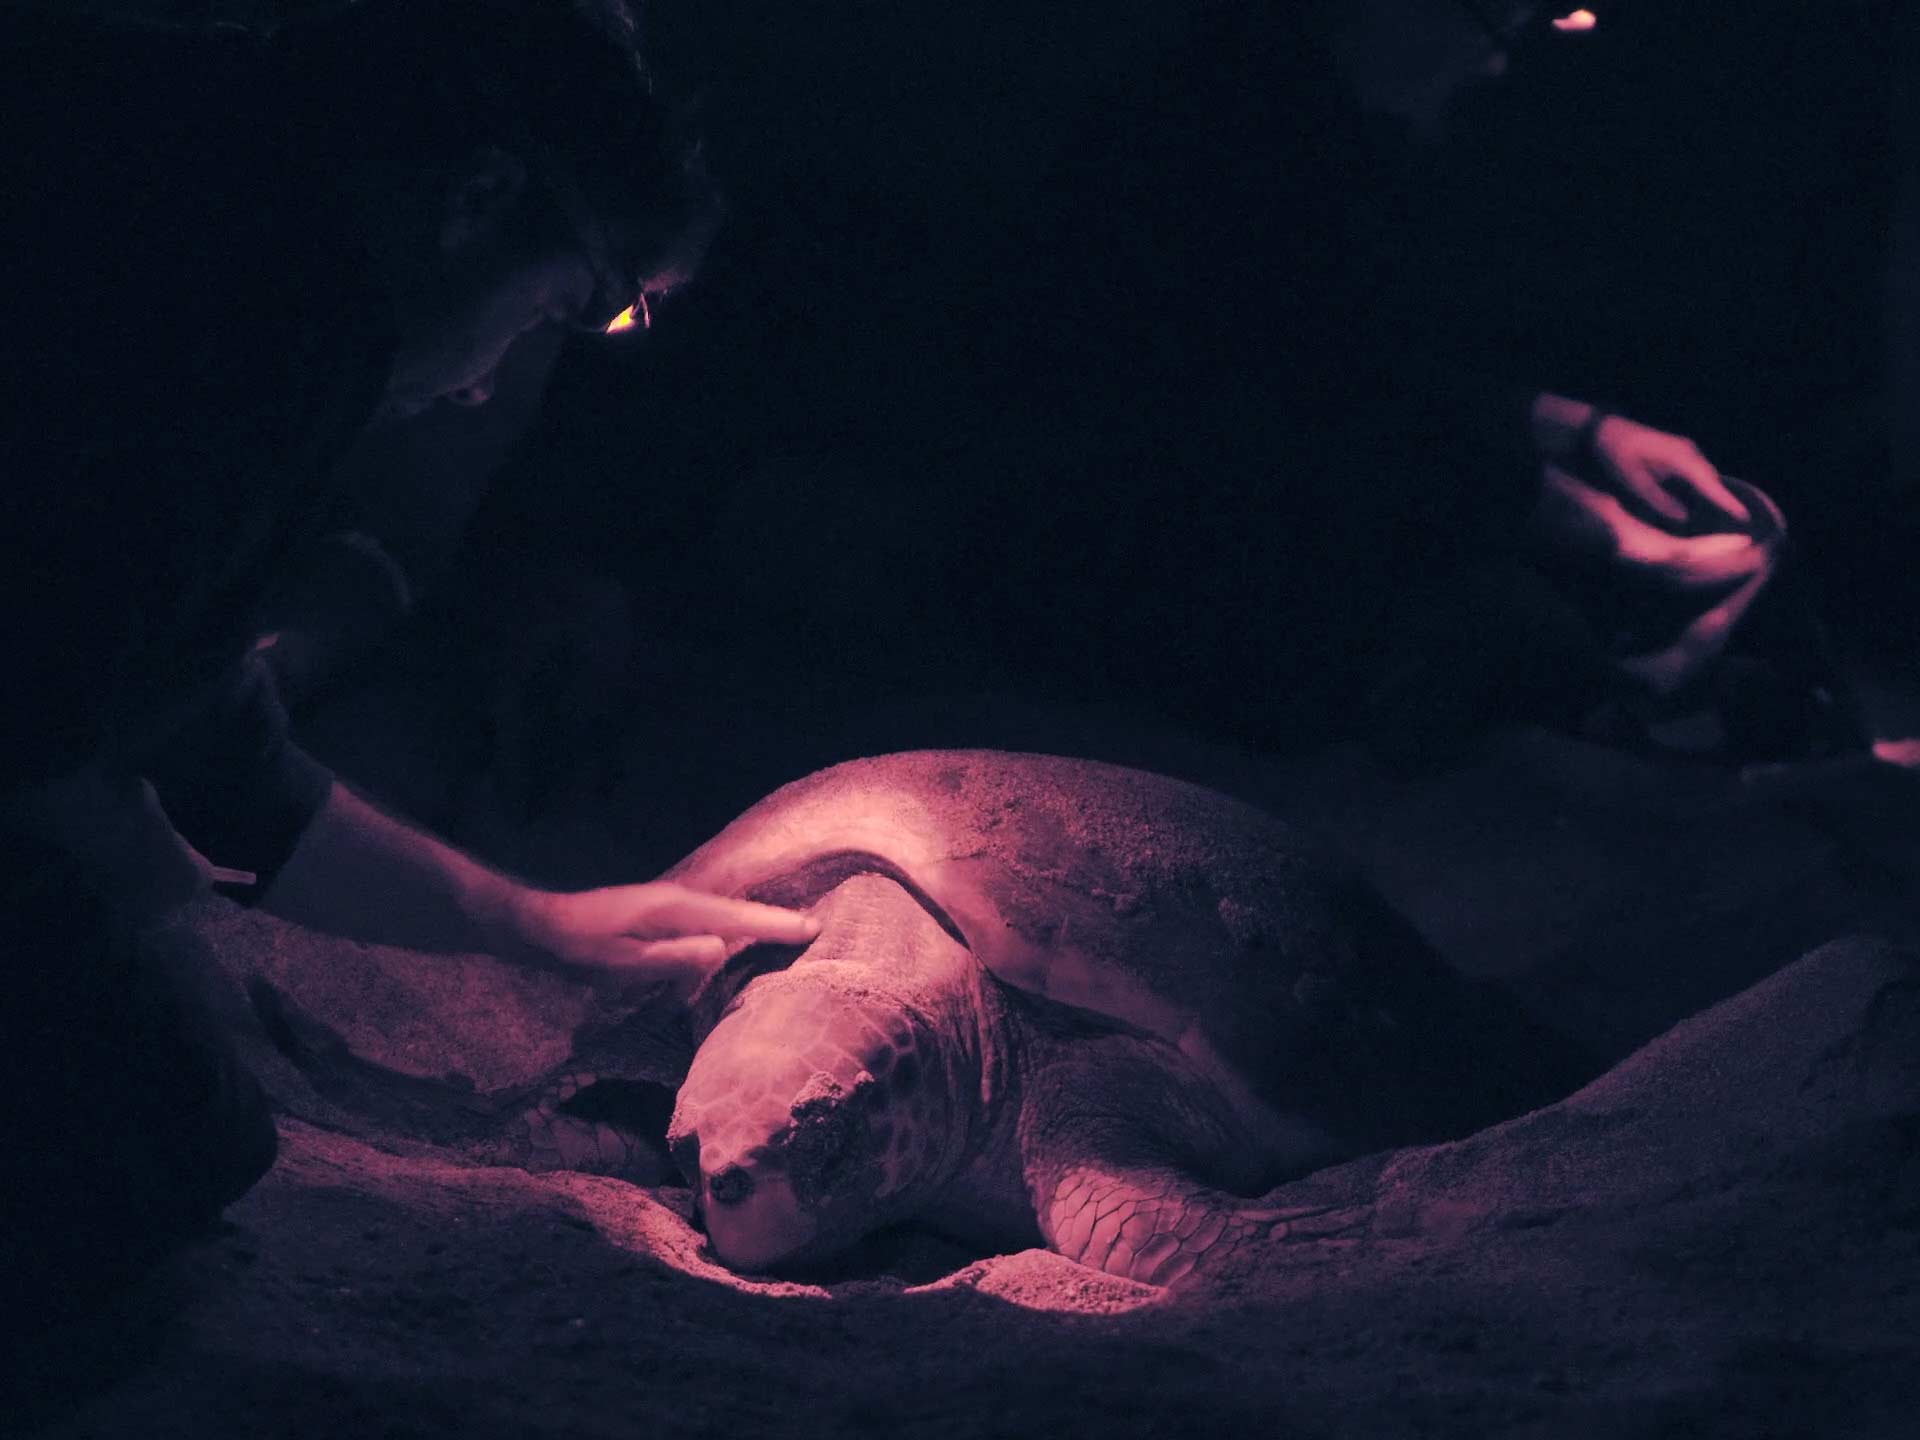 Scientists on a beach in Cape Verde studying a nesting sea turtle